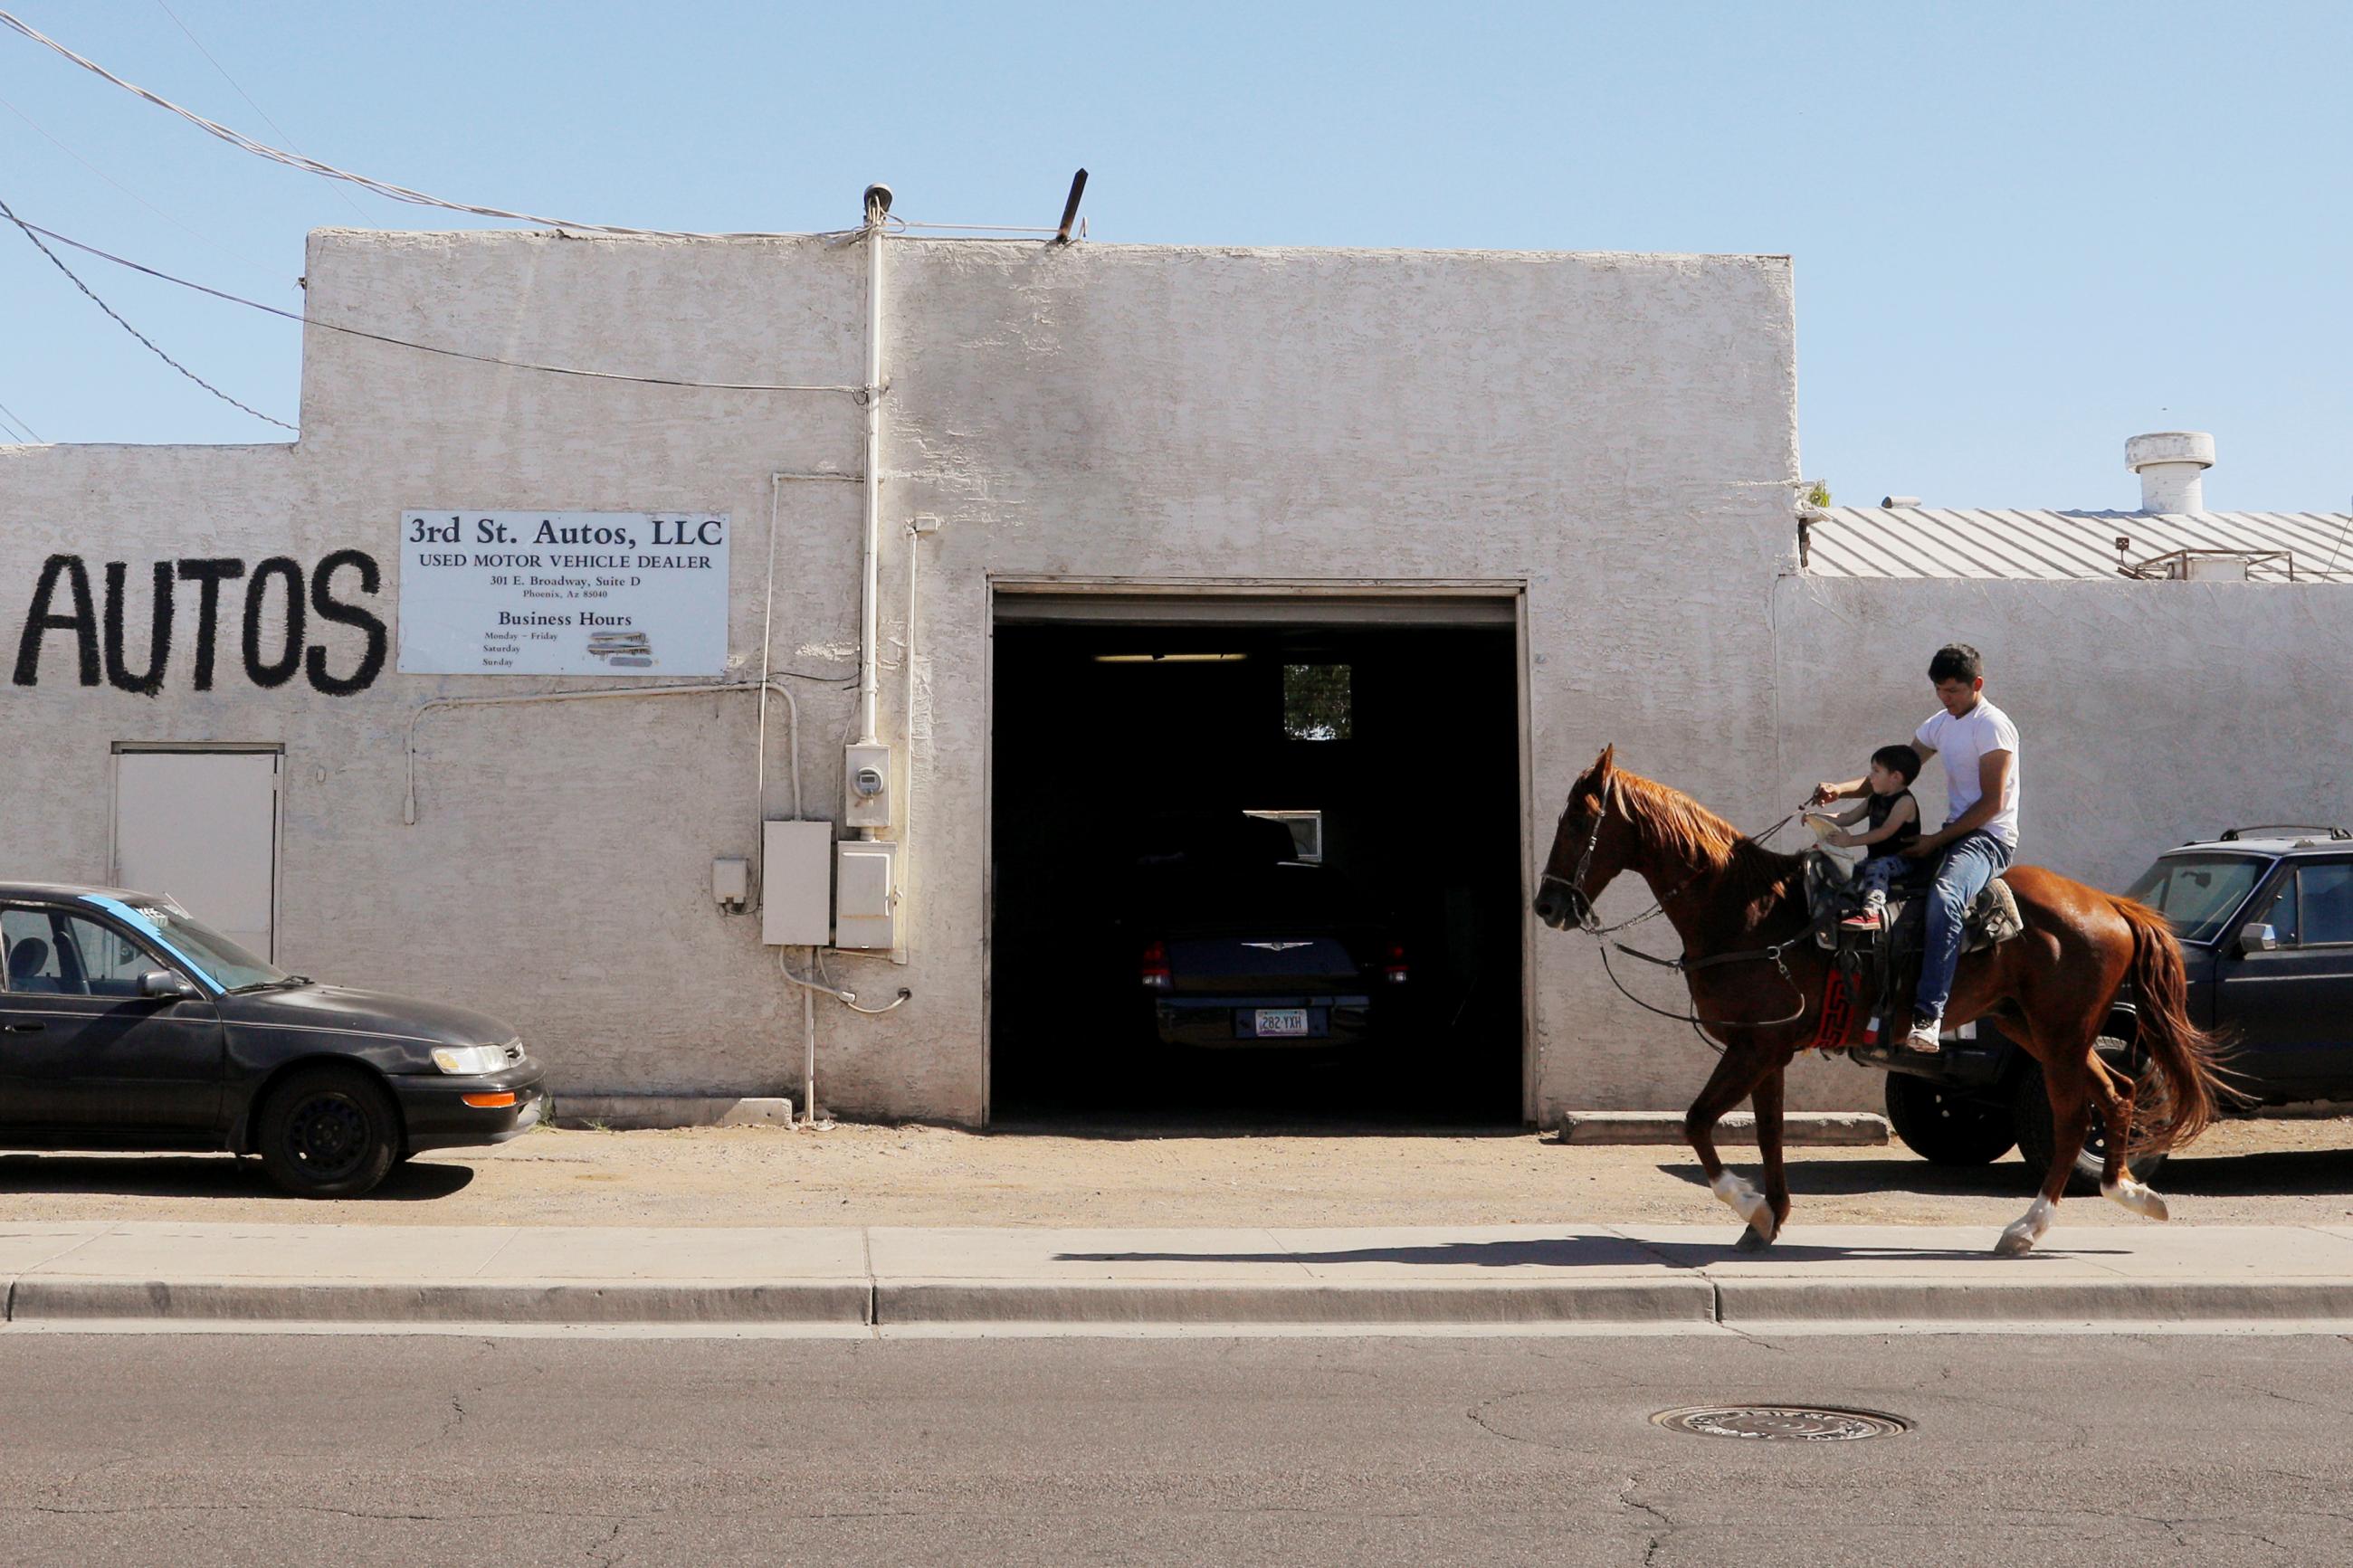 A man and his son ride a horse past an auto repair shop in the Maricopa County city of Phoenix, Arizona, on May 25, 2019.